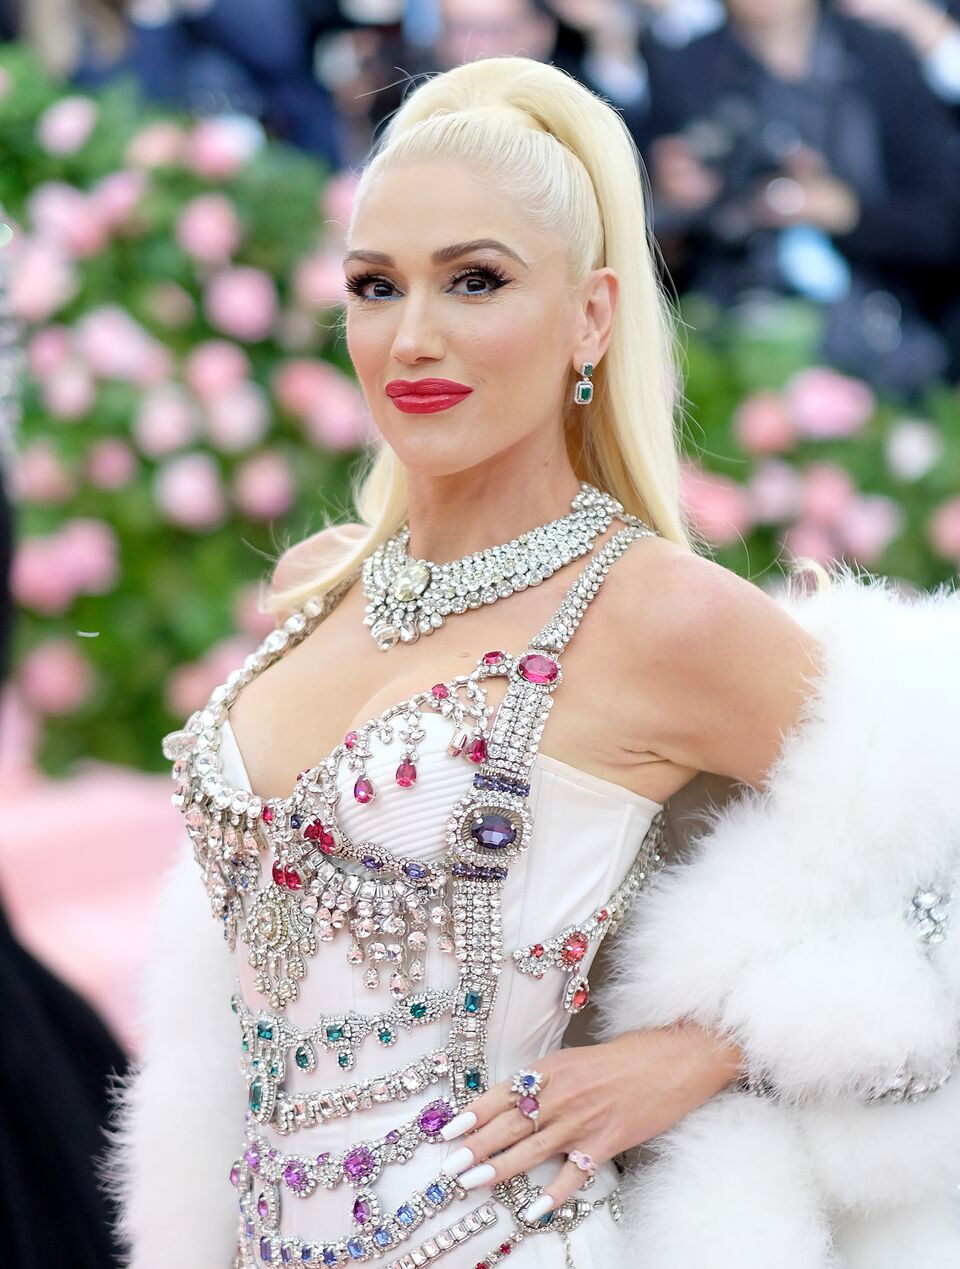 Gwen Stefani attends The 2019 Met Gala. | Source: Getty Images